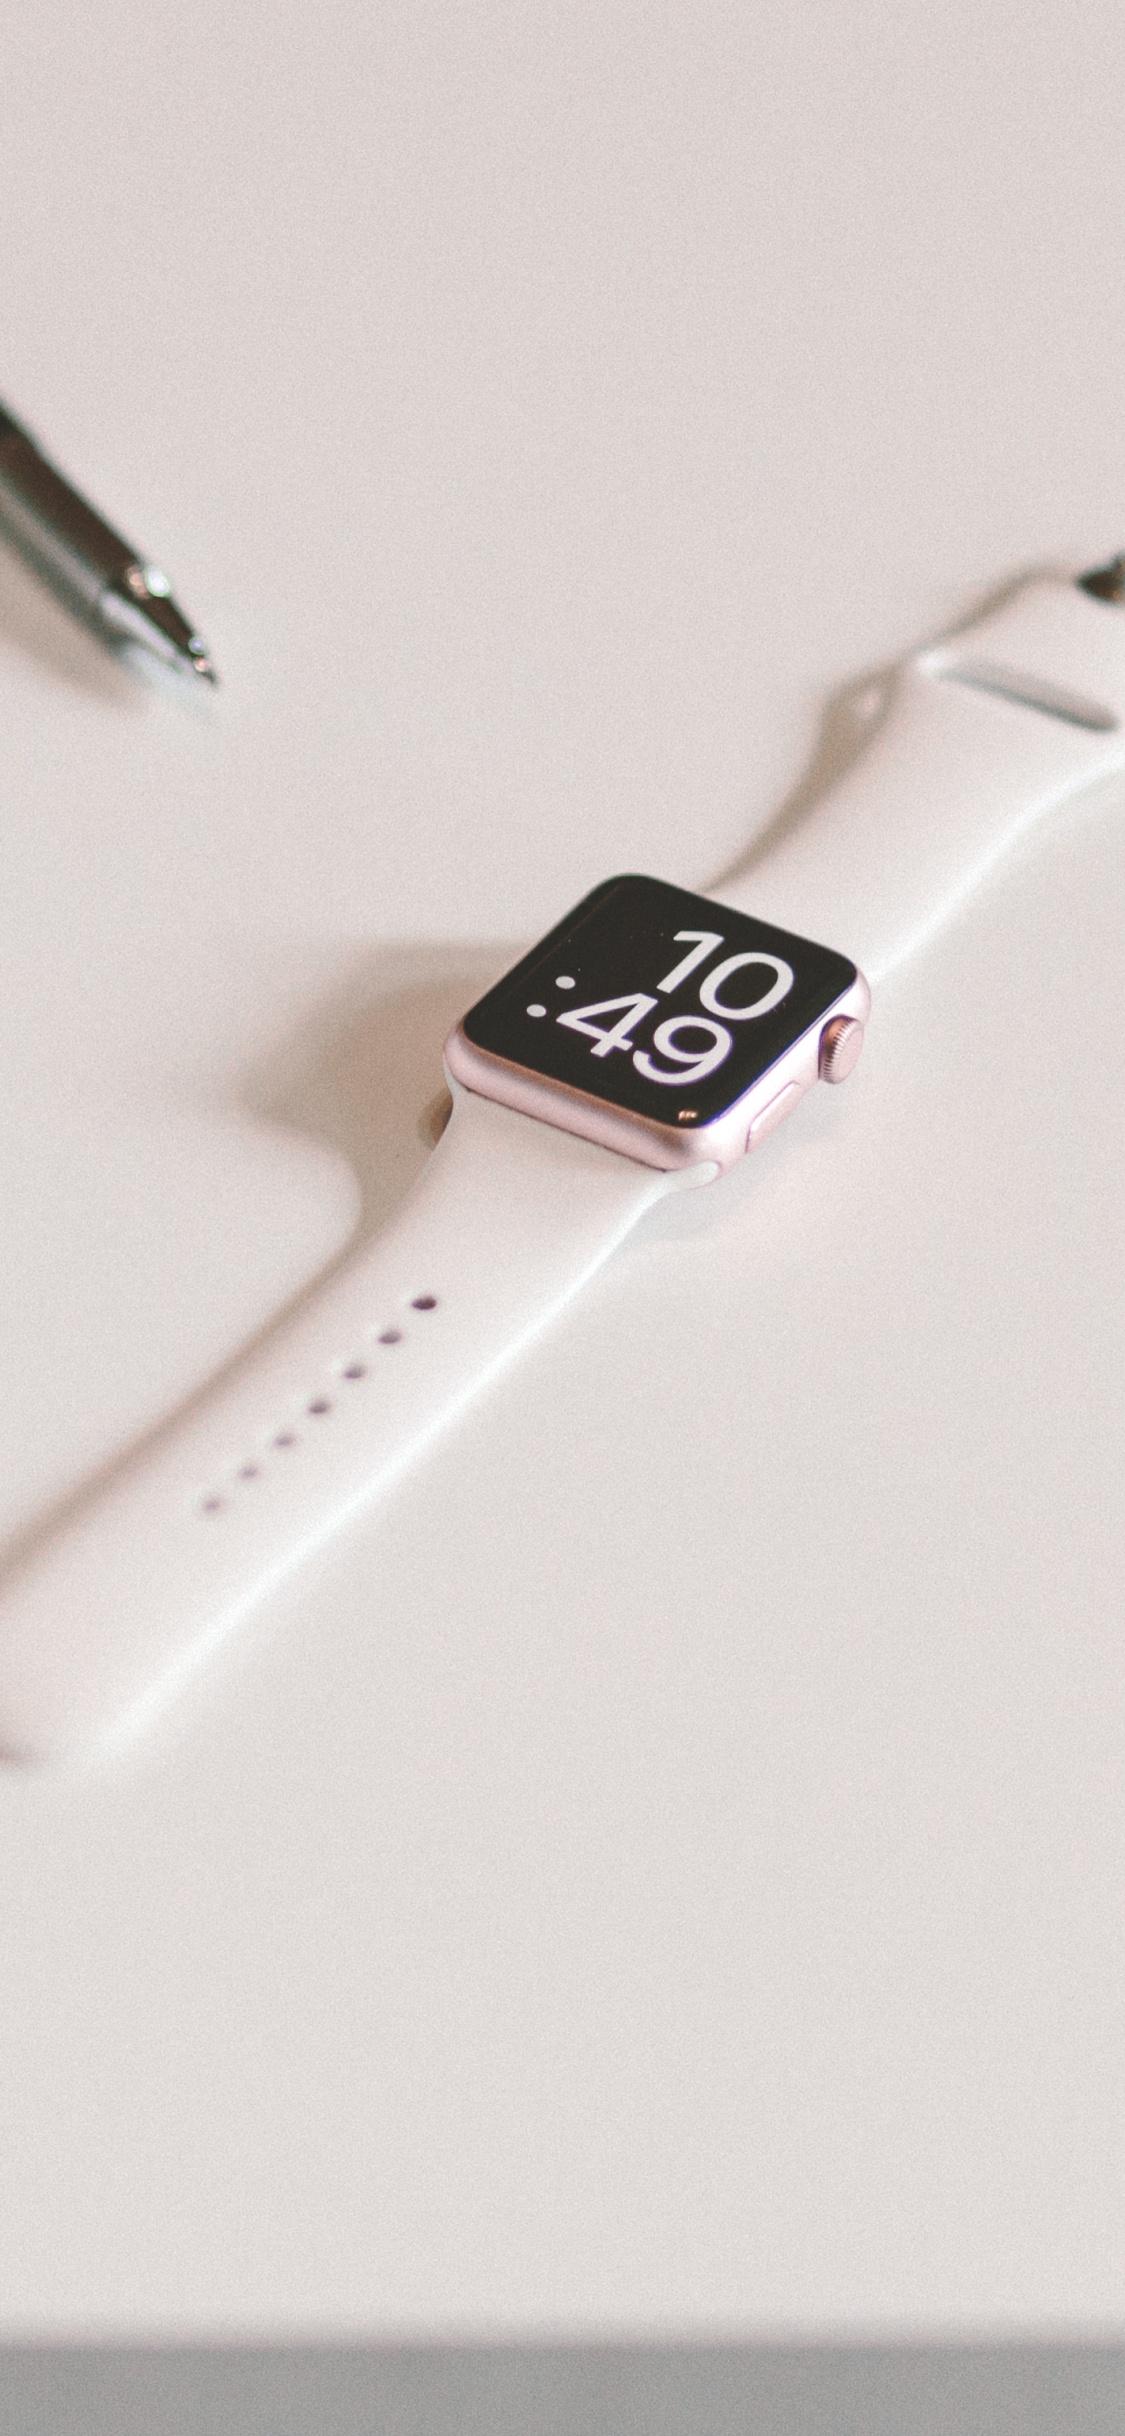 Silver Apple Watch With White Sport Band Beside Black Click Pen. Wallpaper in 1125x2436 Resolution